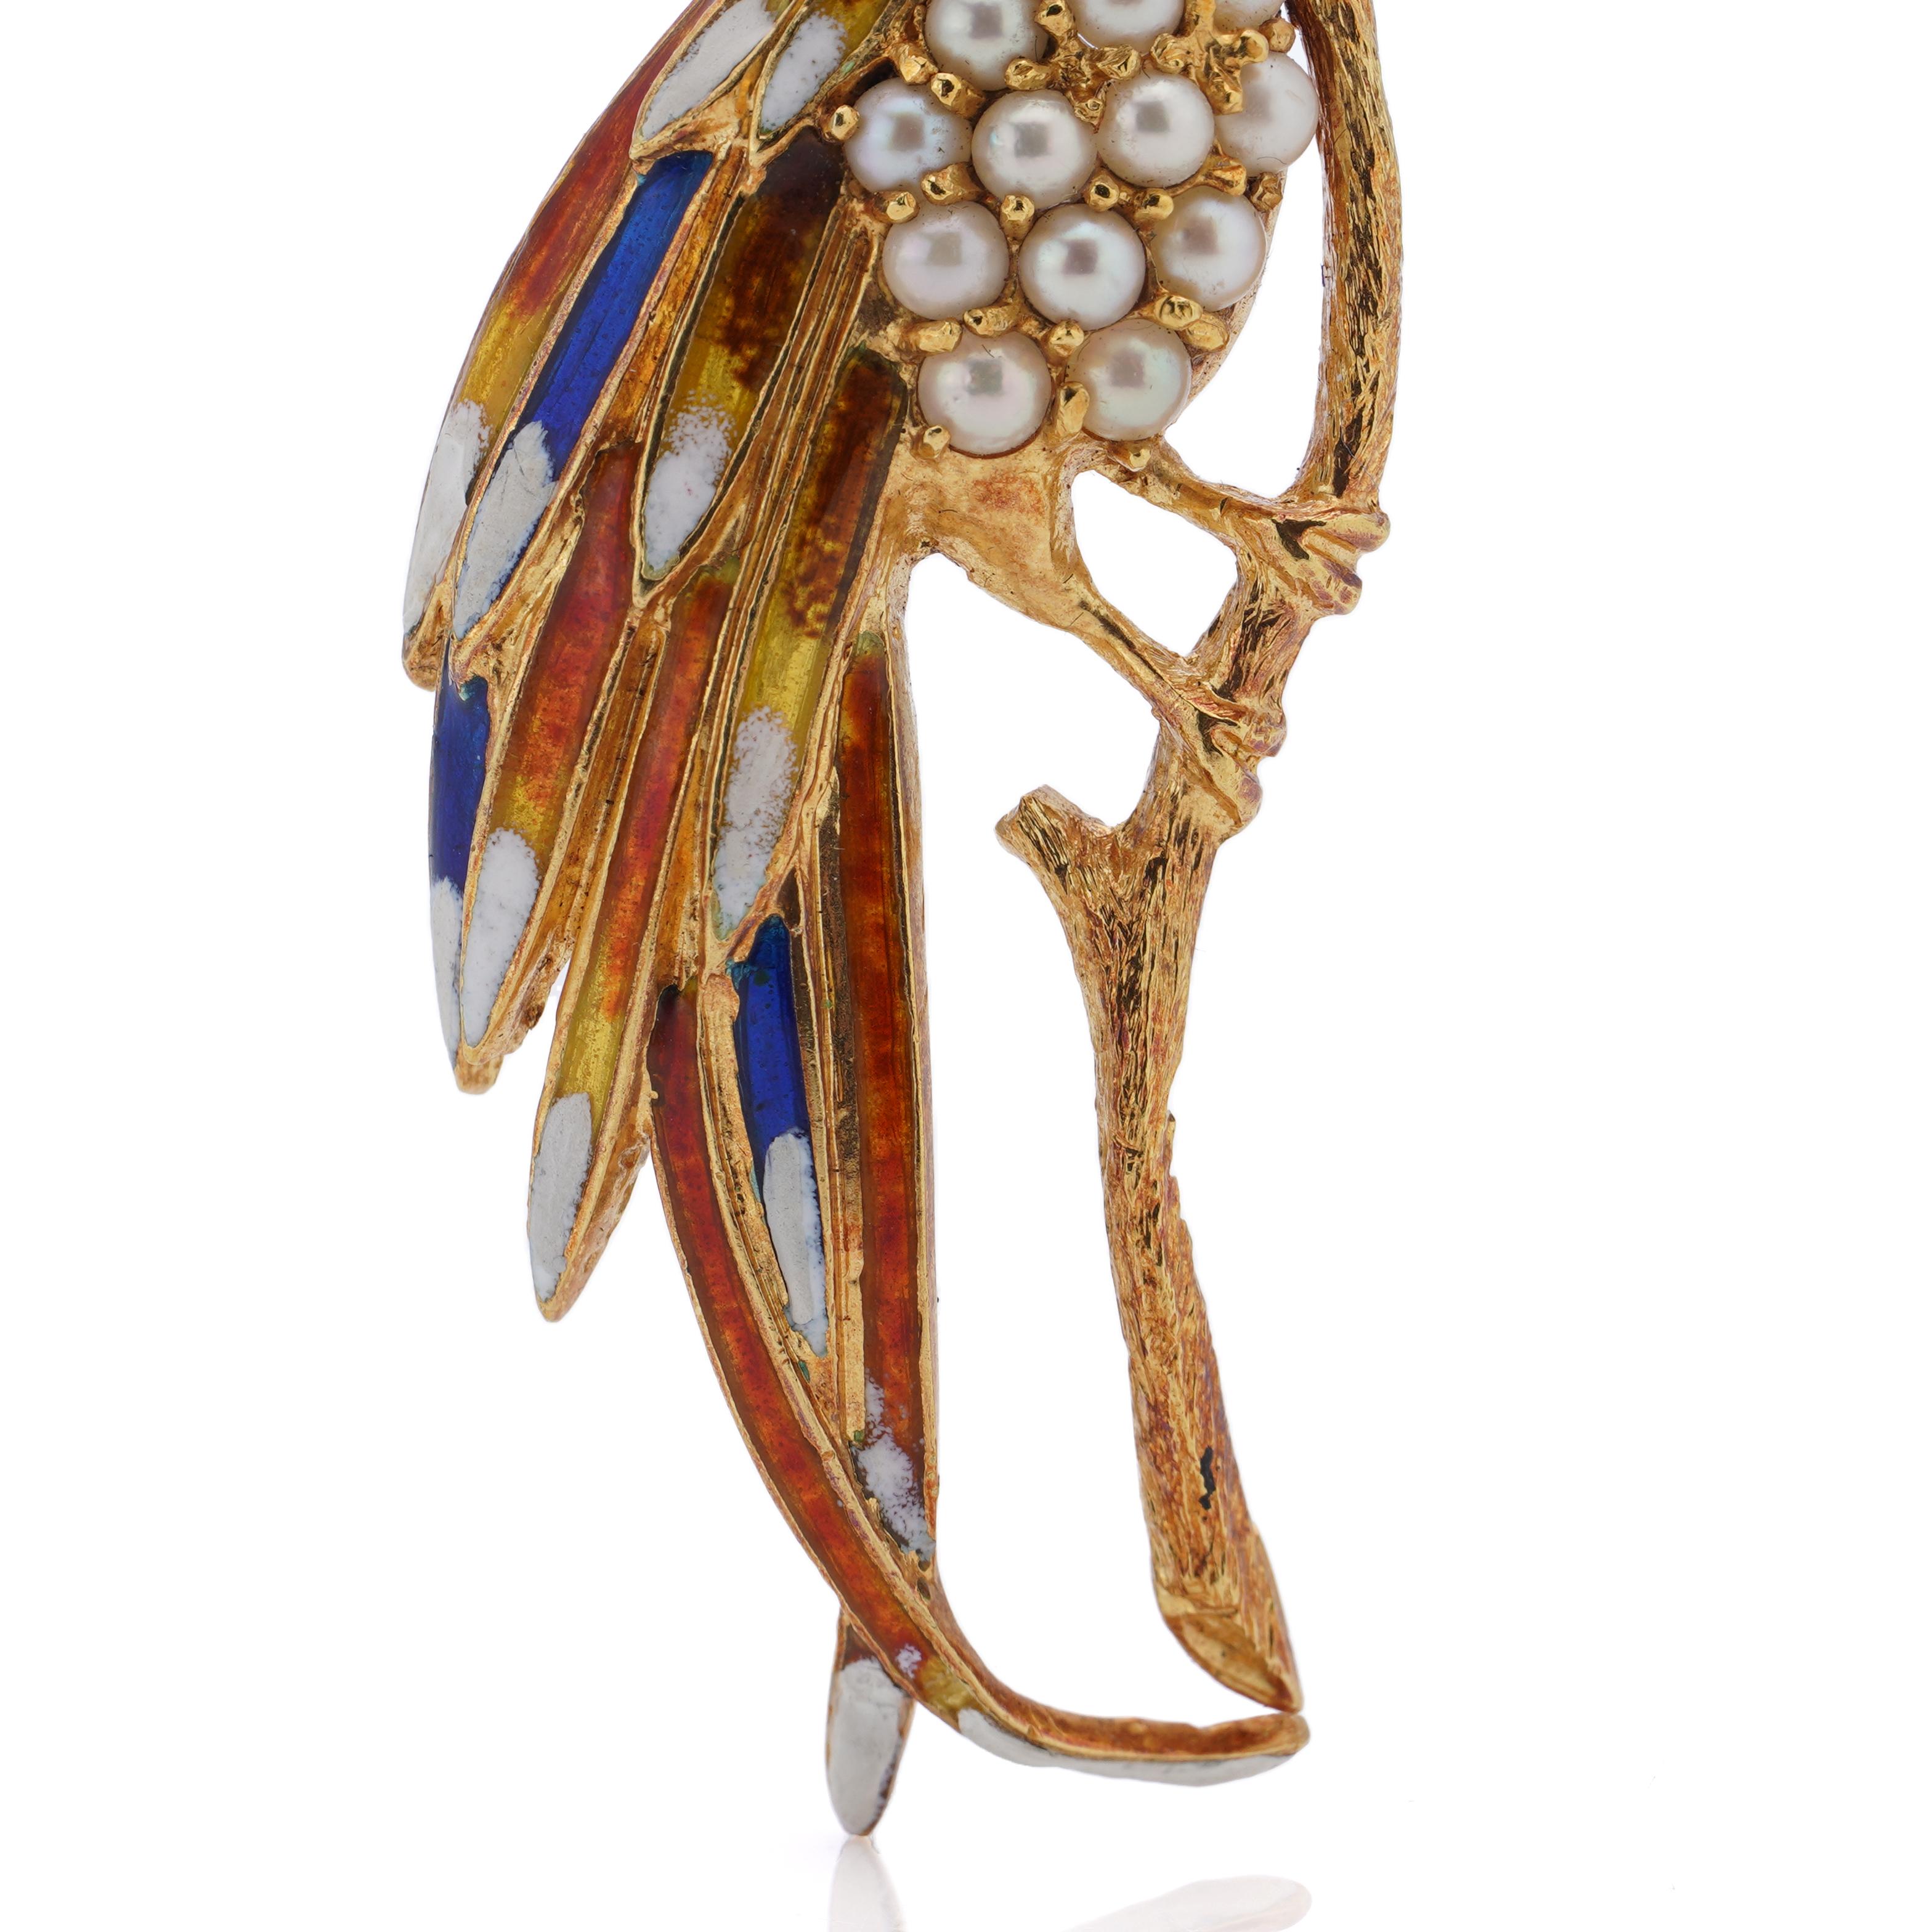 Mid-20th century 18kt gold bird brooch on a branch with colourful feathers For Sale 2